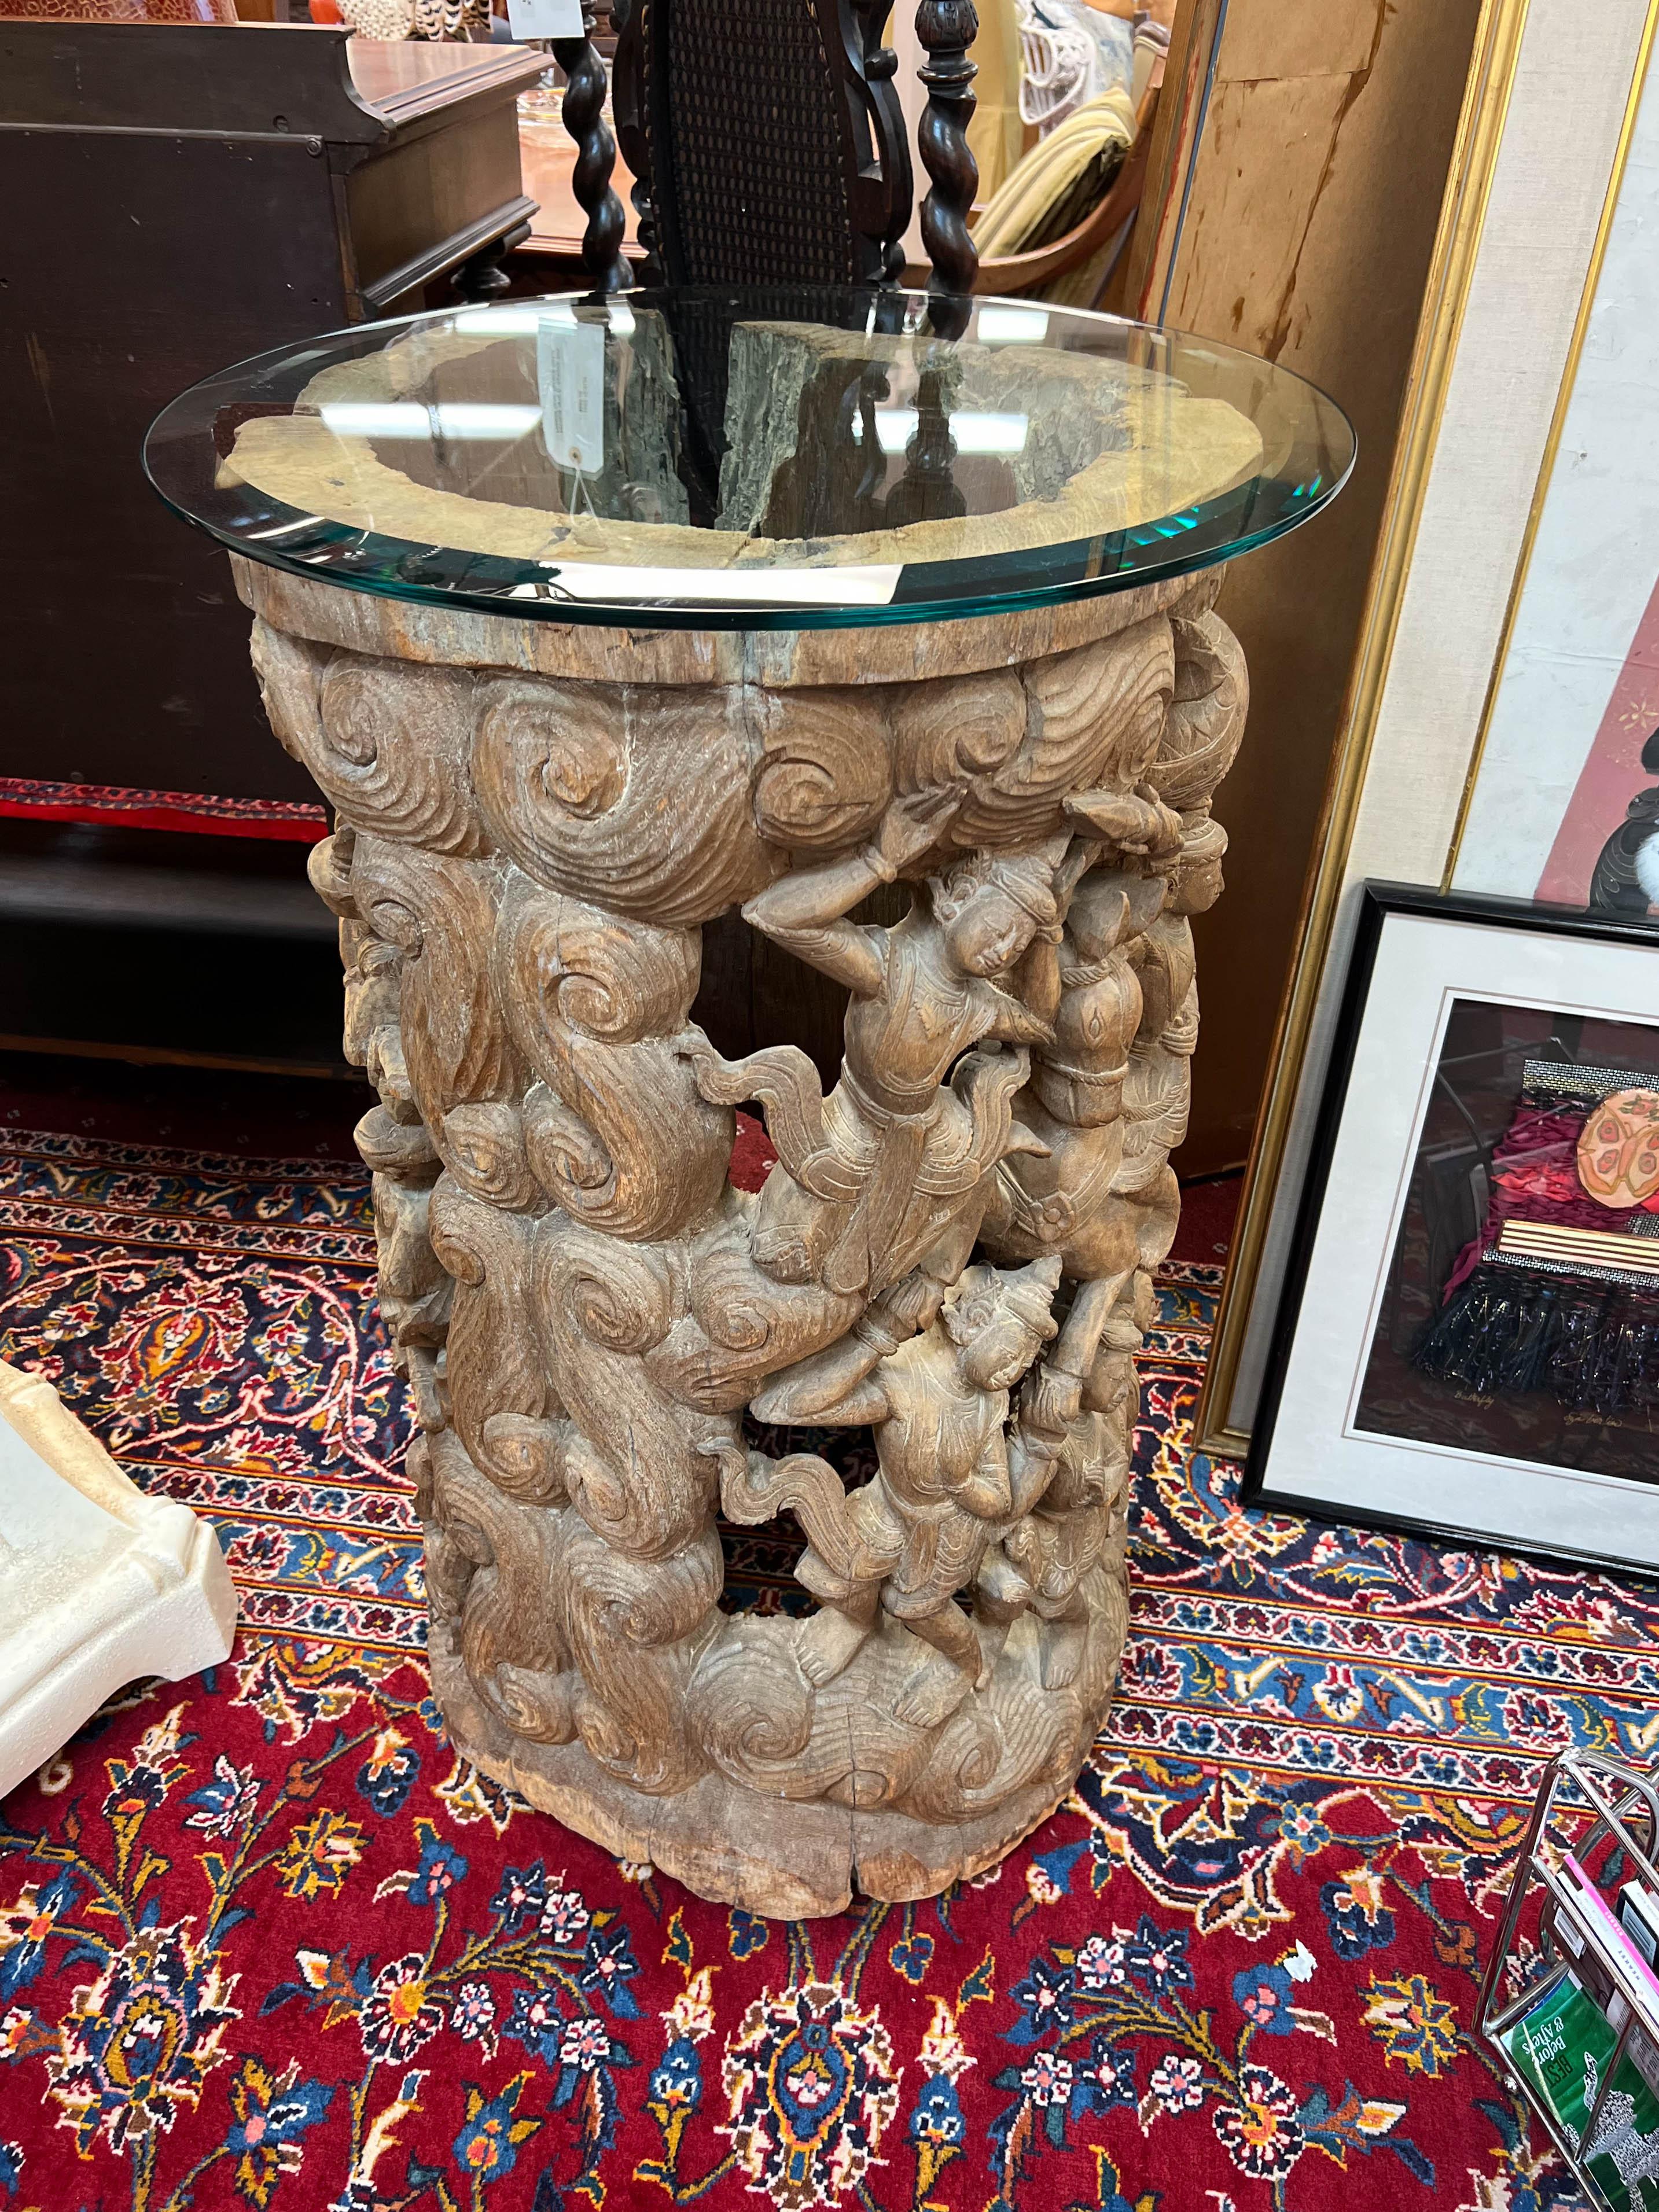 An antique Thai wood carving. Carved from a tree trunk hollowed in its center, this drum pedestal will add texture and interest to any scape. It will capture your attention with its rustic, organic appeal. A piece of art by itself or a display